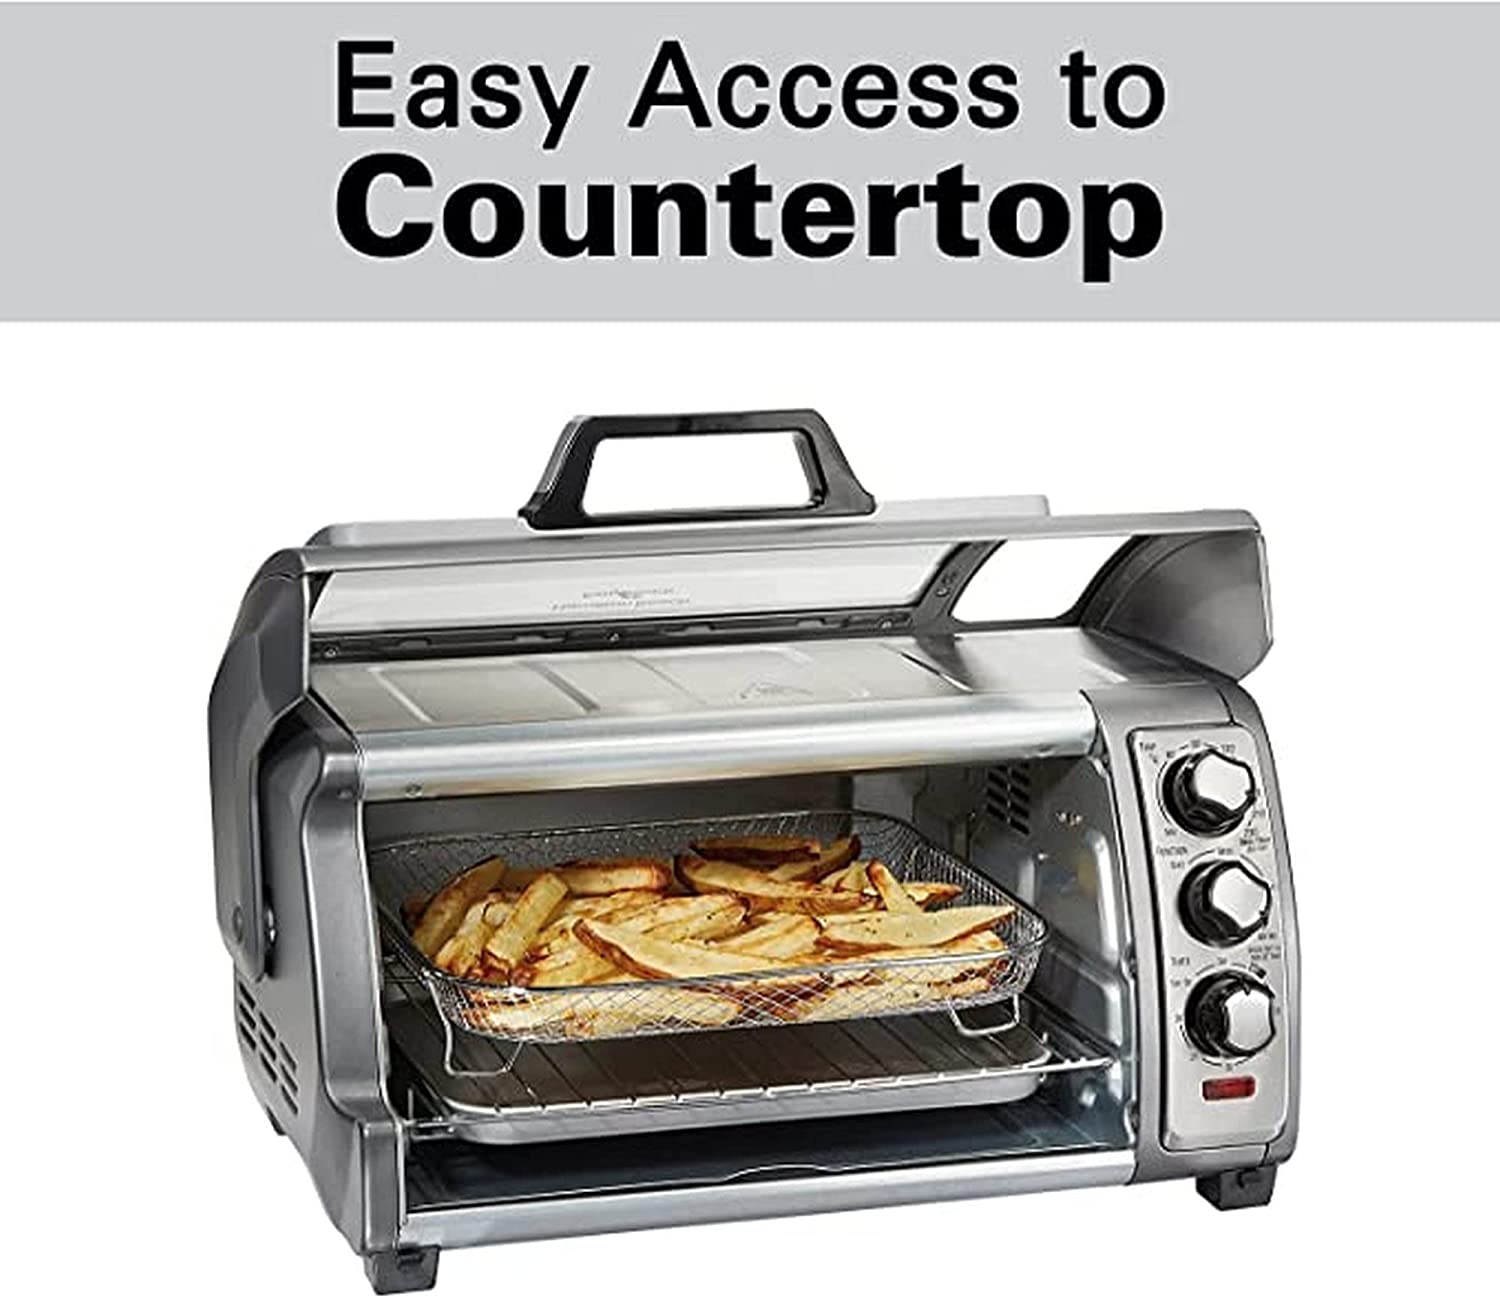 https://discounttoday.net/wp-content/uploads/2022/09/Hamilton-Beach-Countertop-Toaster-Oven-Easy-Reach-With-Roll-Top-Door-6-Slice-Convection-31123D-Silver1.jpg